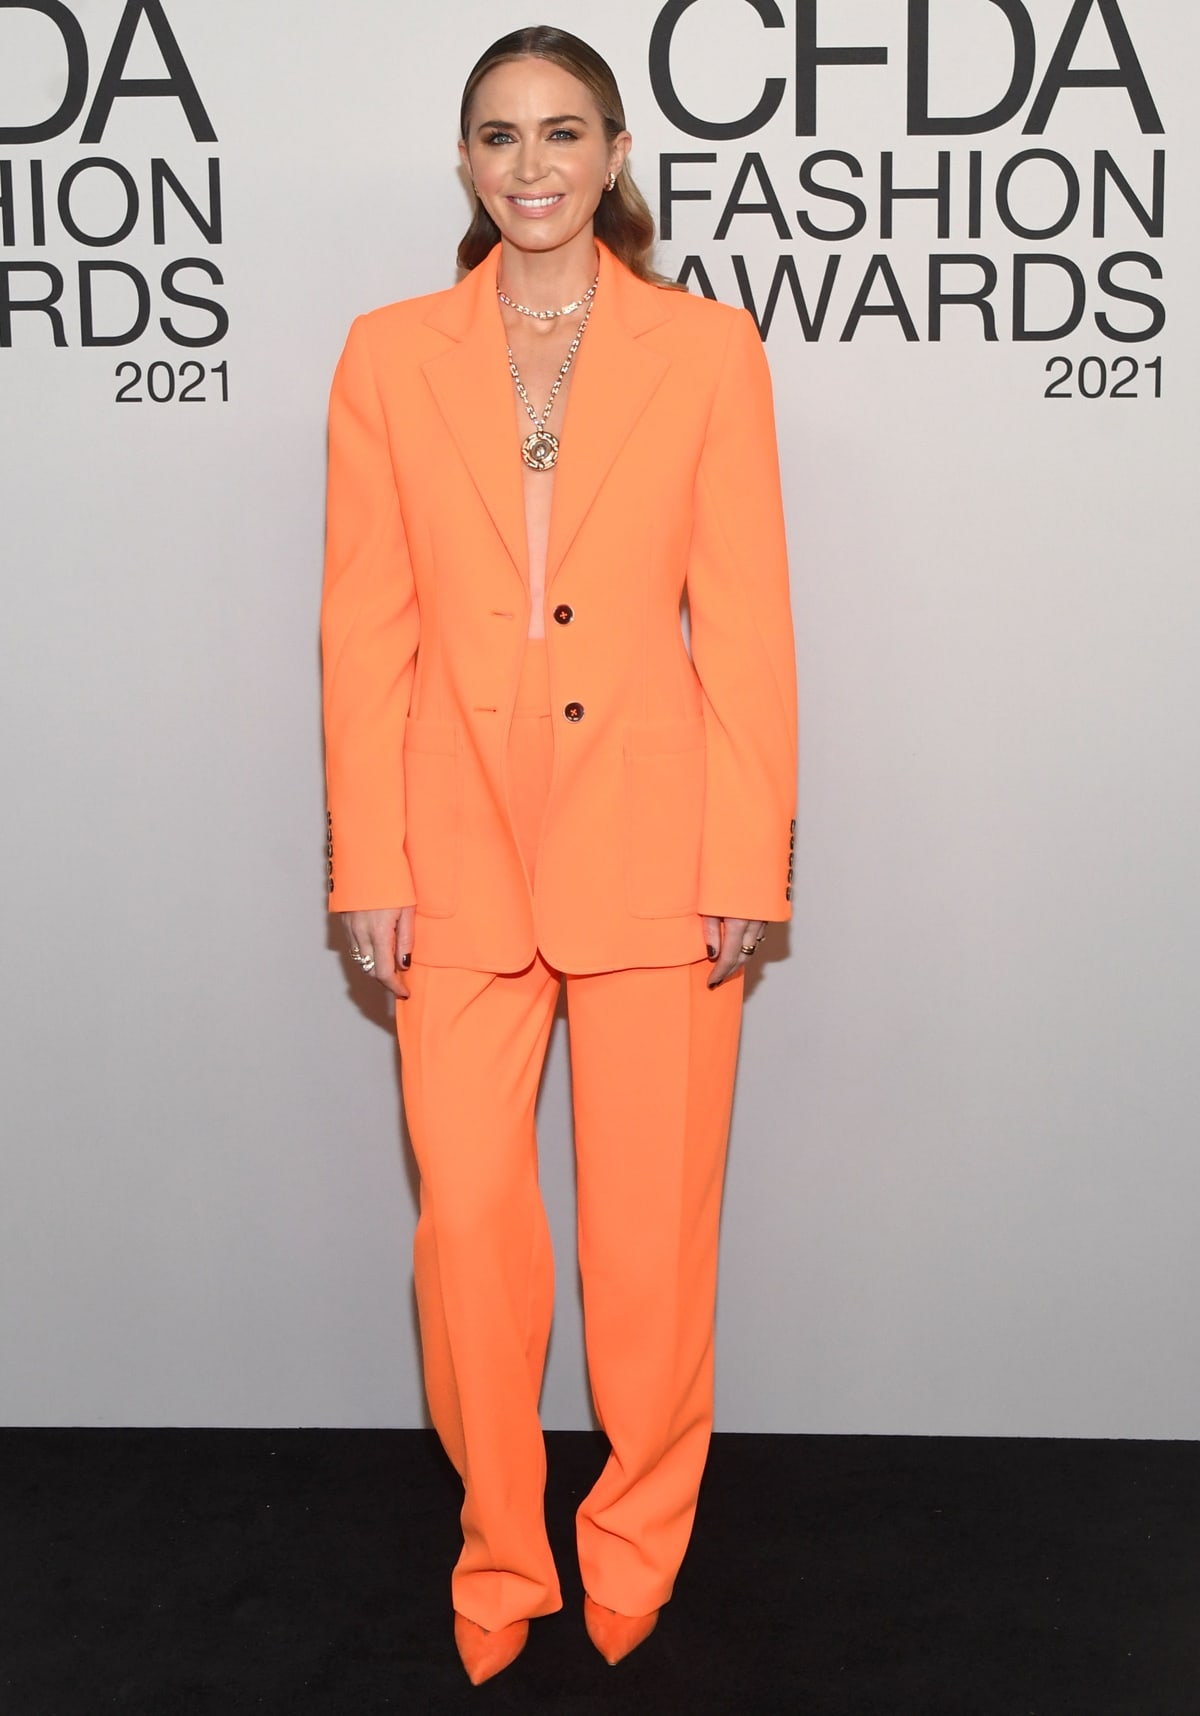 Emily Blunt wears a tangerine Christopher John Rogers Resort 2022 suit and matching Titi Adesa pumps as she hosts the 2021 CFDA Fashion Awards